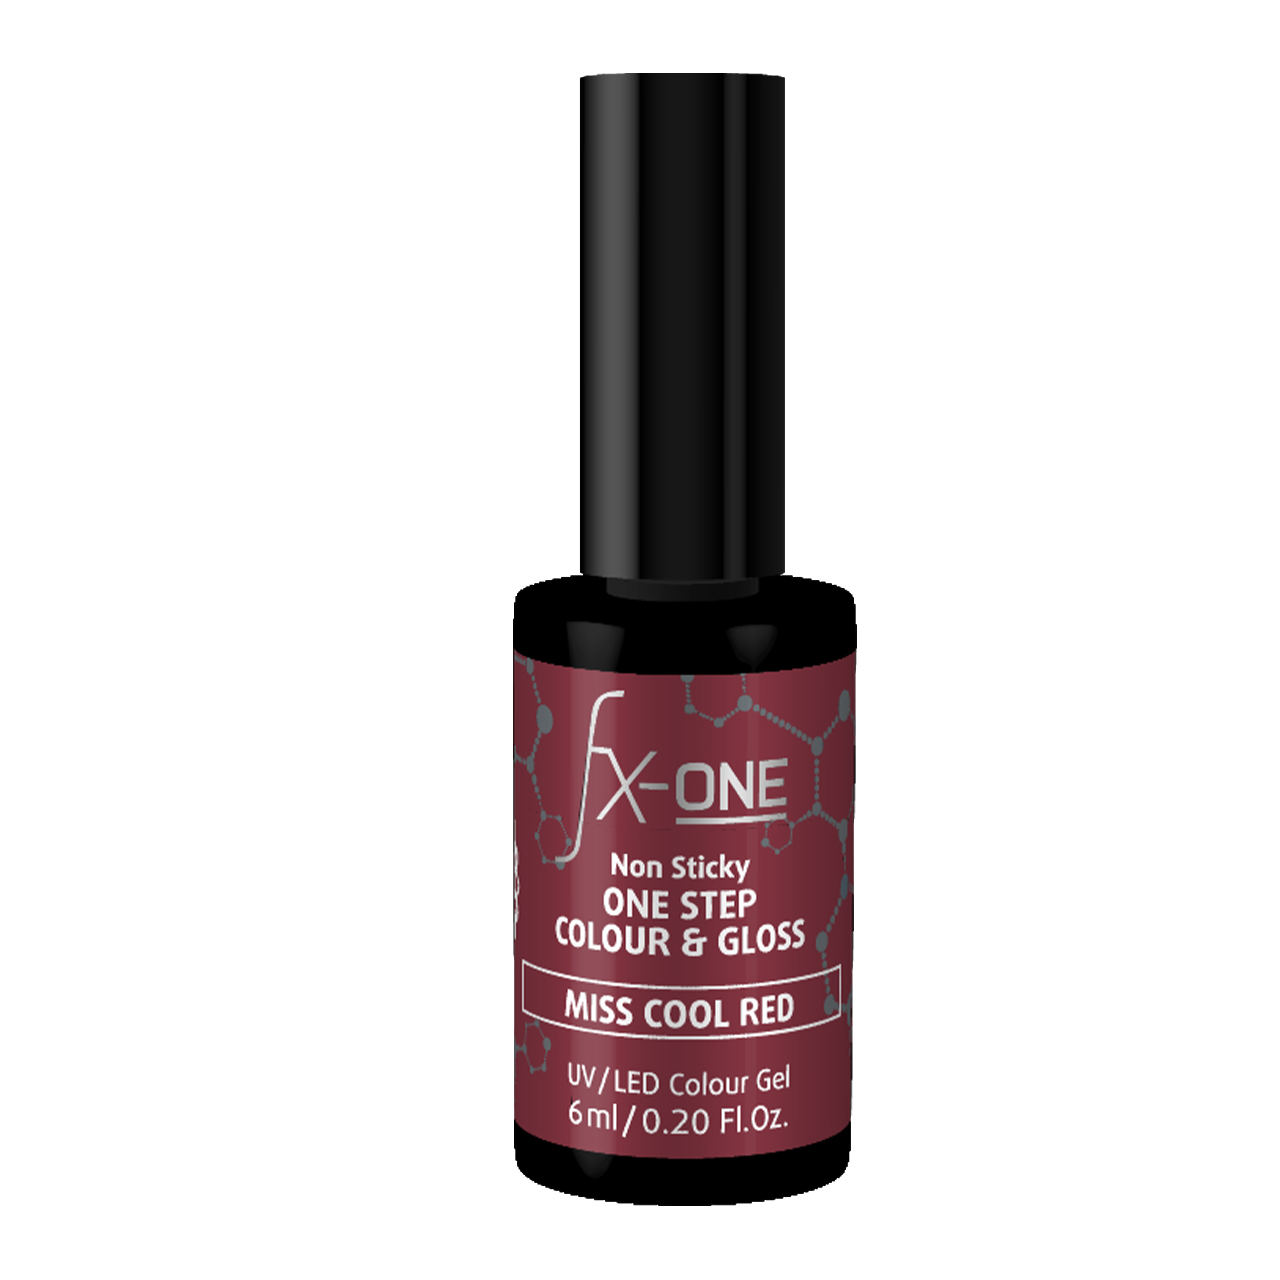 FX-ONE Colour & Gloss Miss Cool Red 6ml